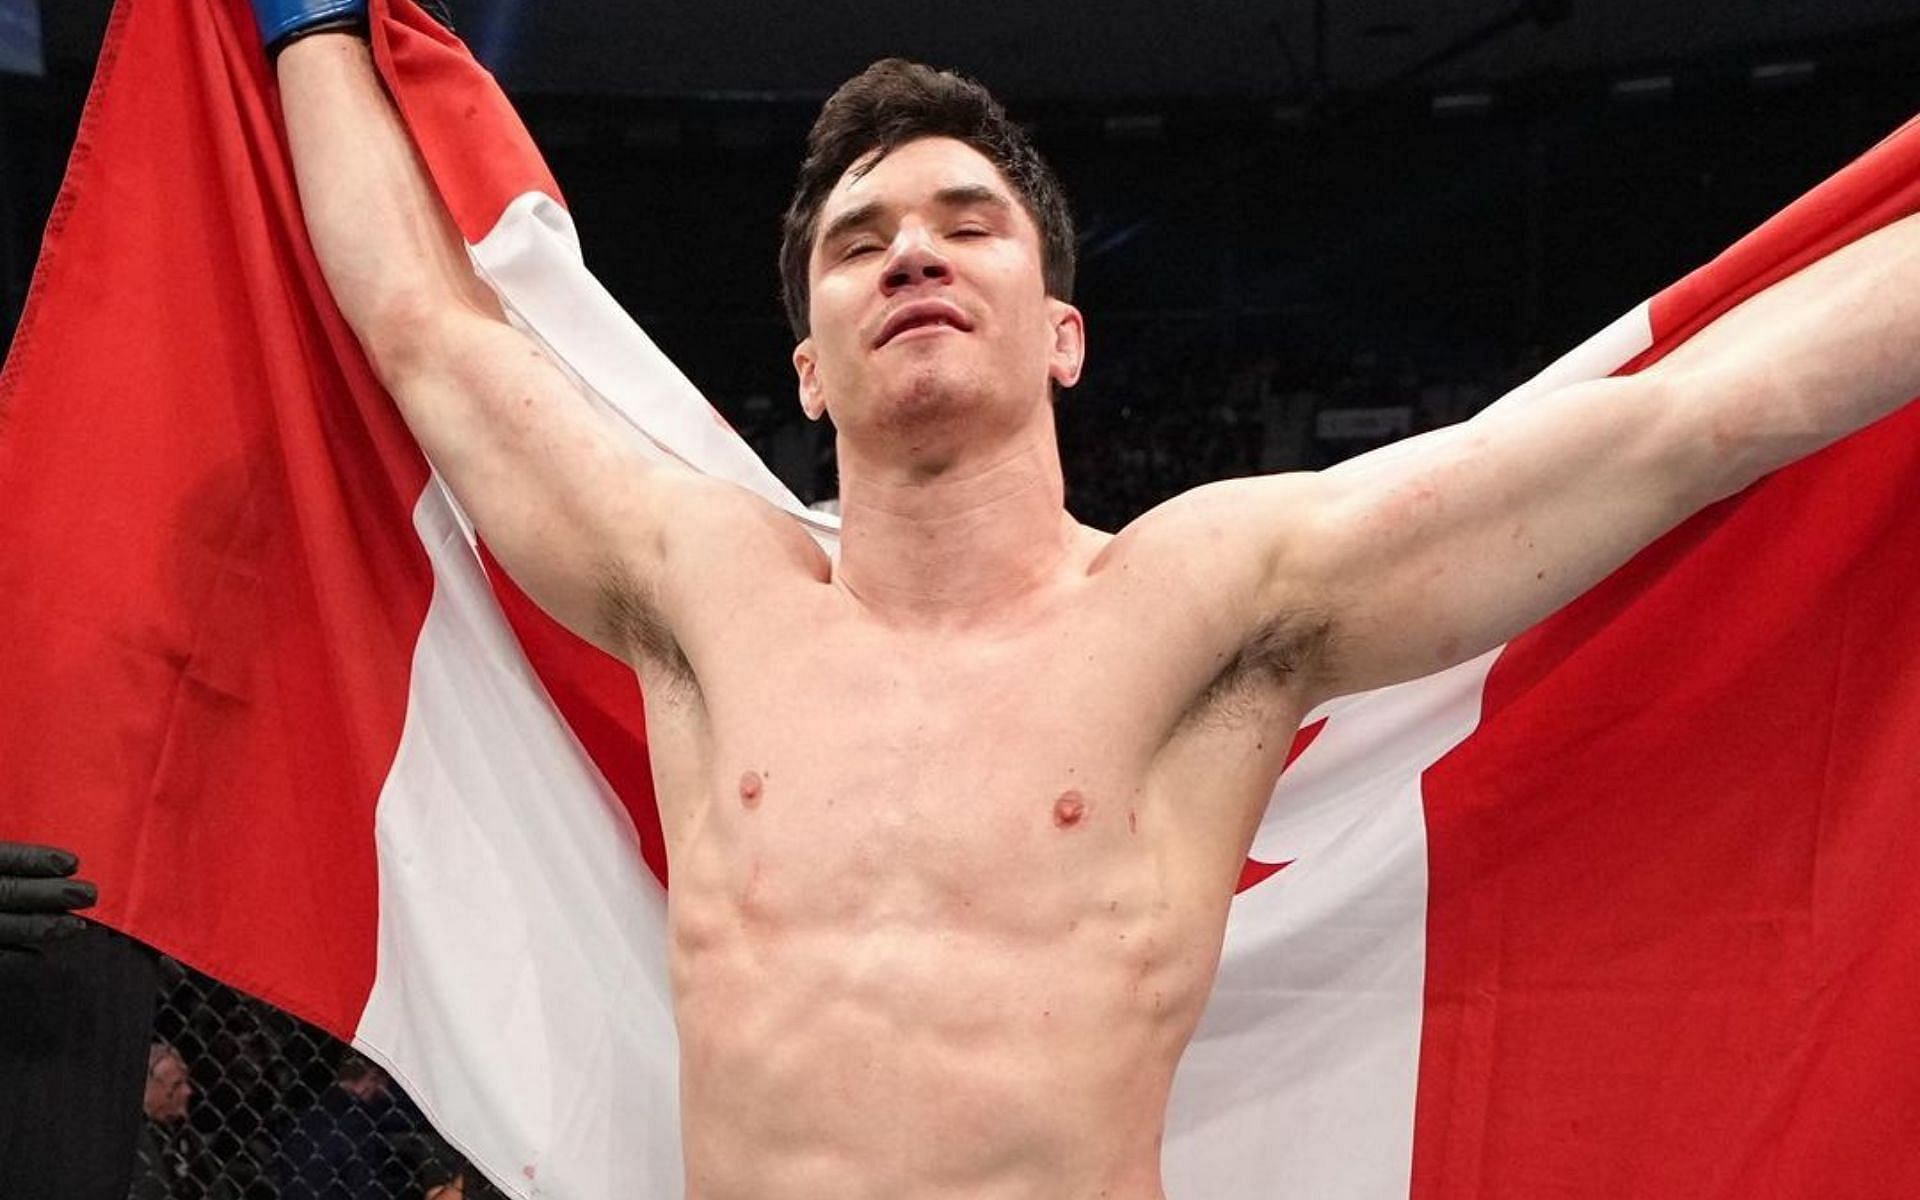 Mike Malott impressed in his octagon debut against Mickey Gall